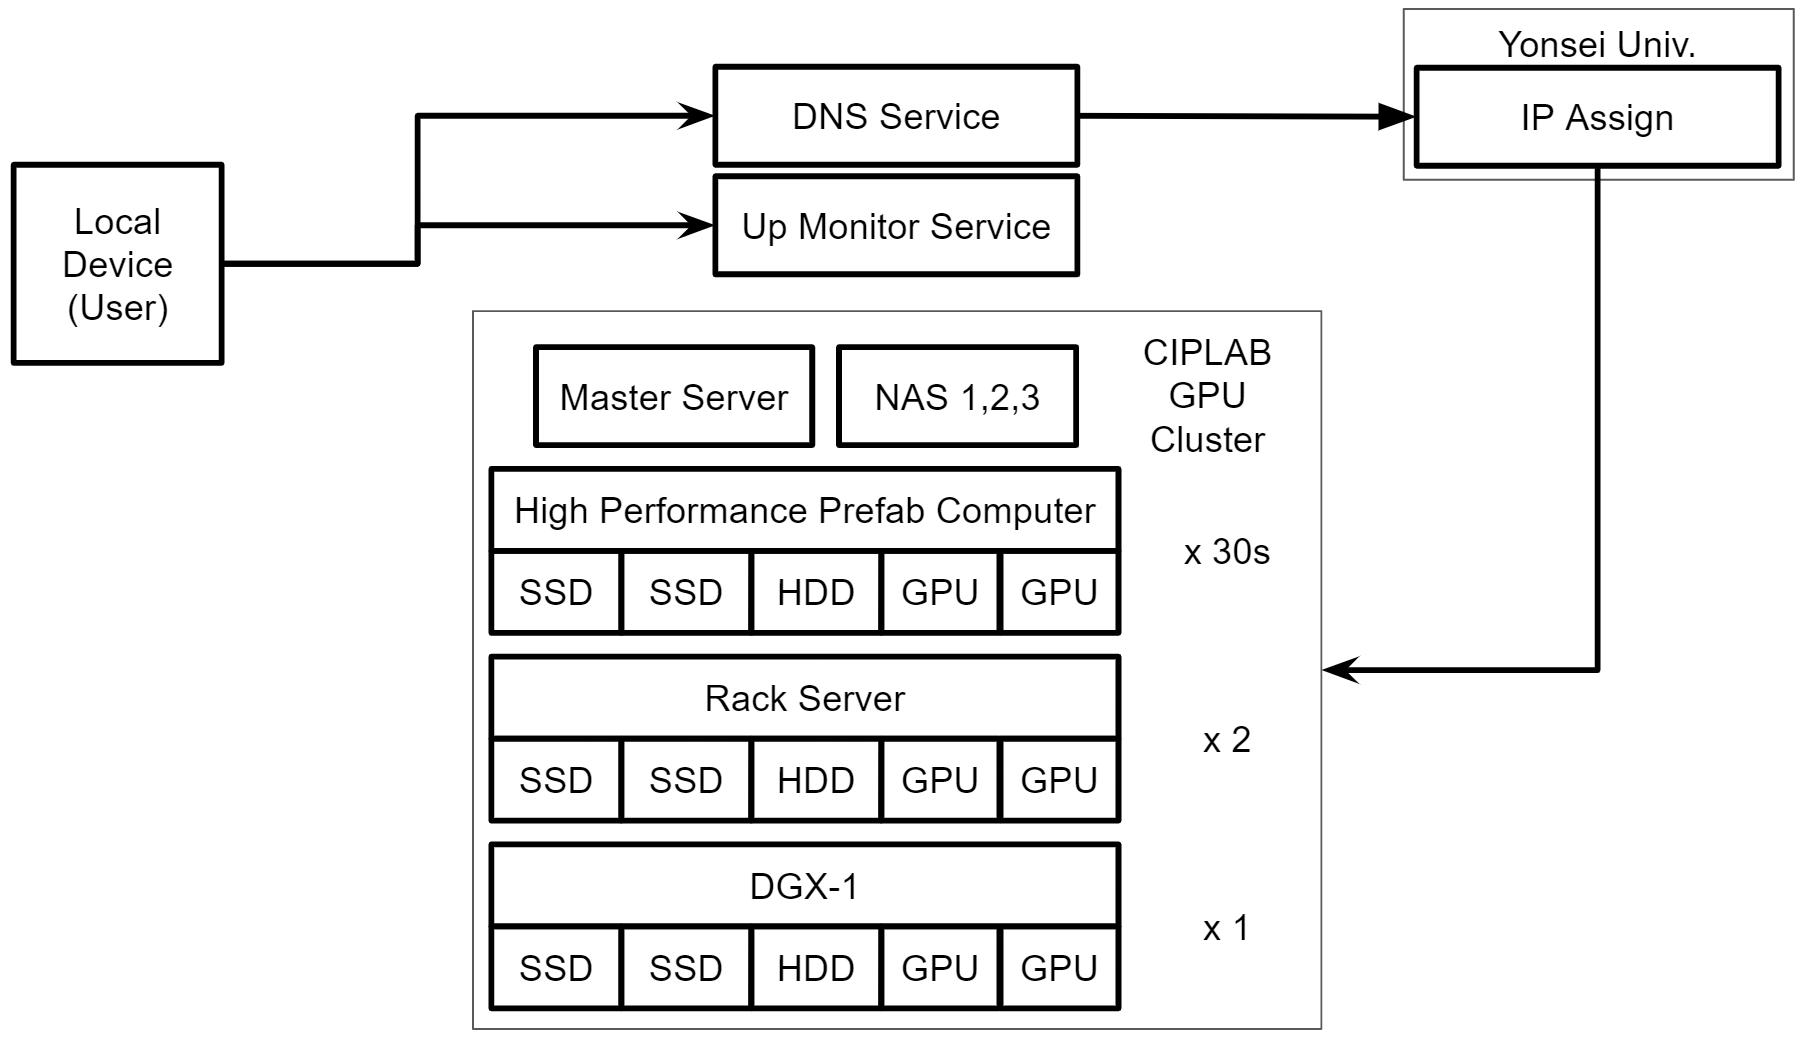 CIPLAB GPU Cluster Overview